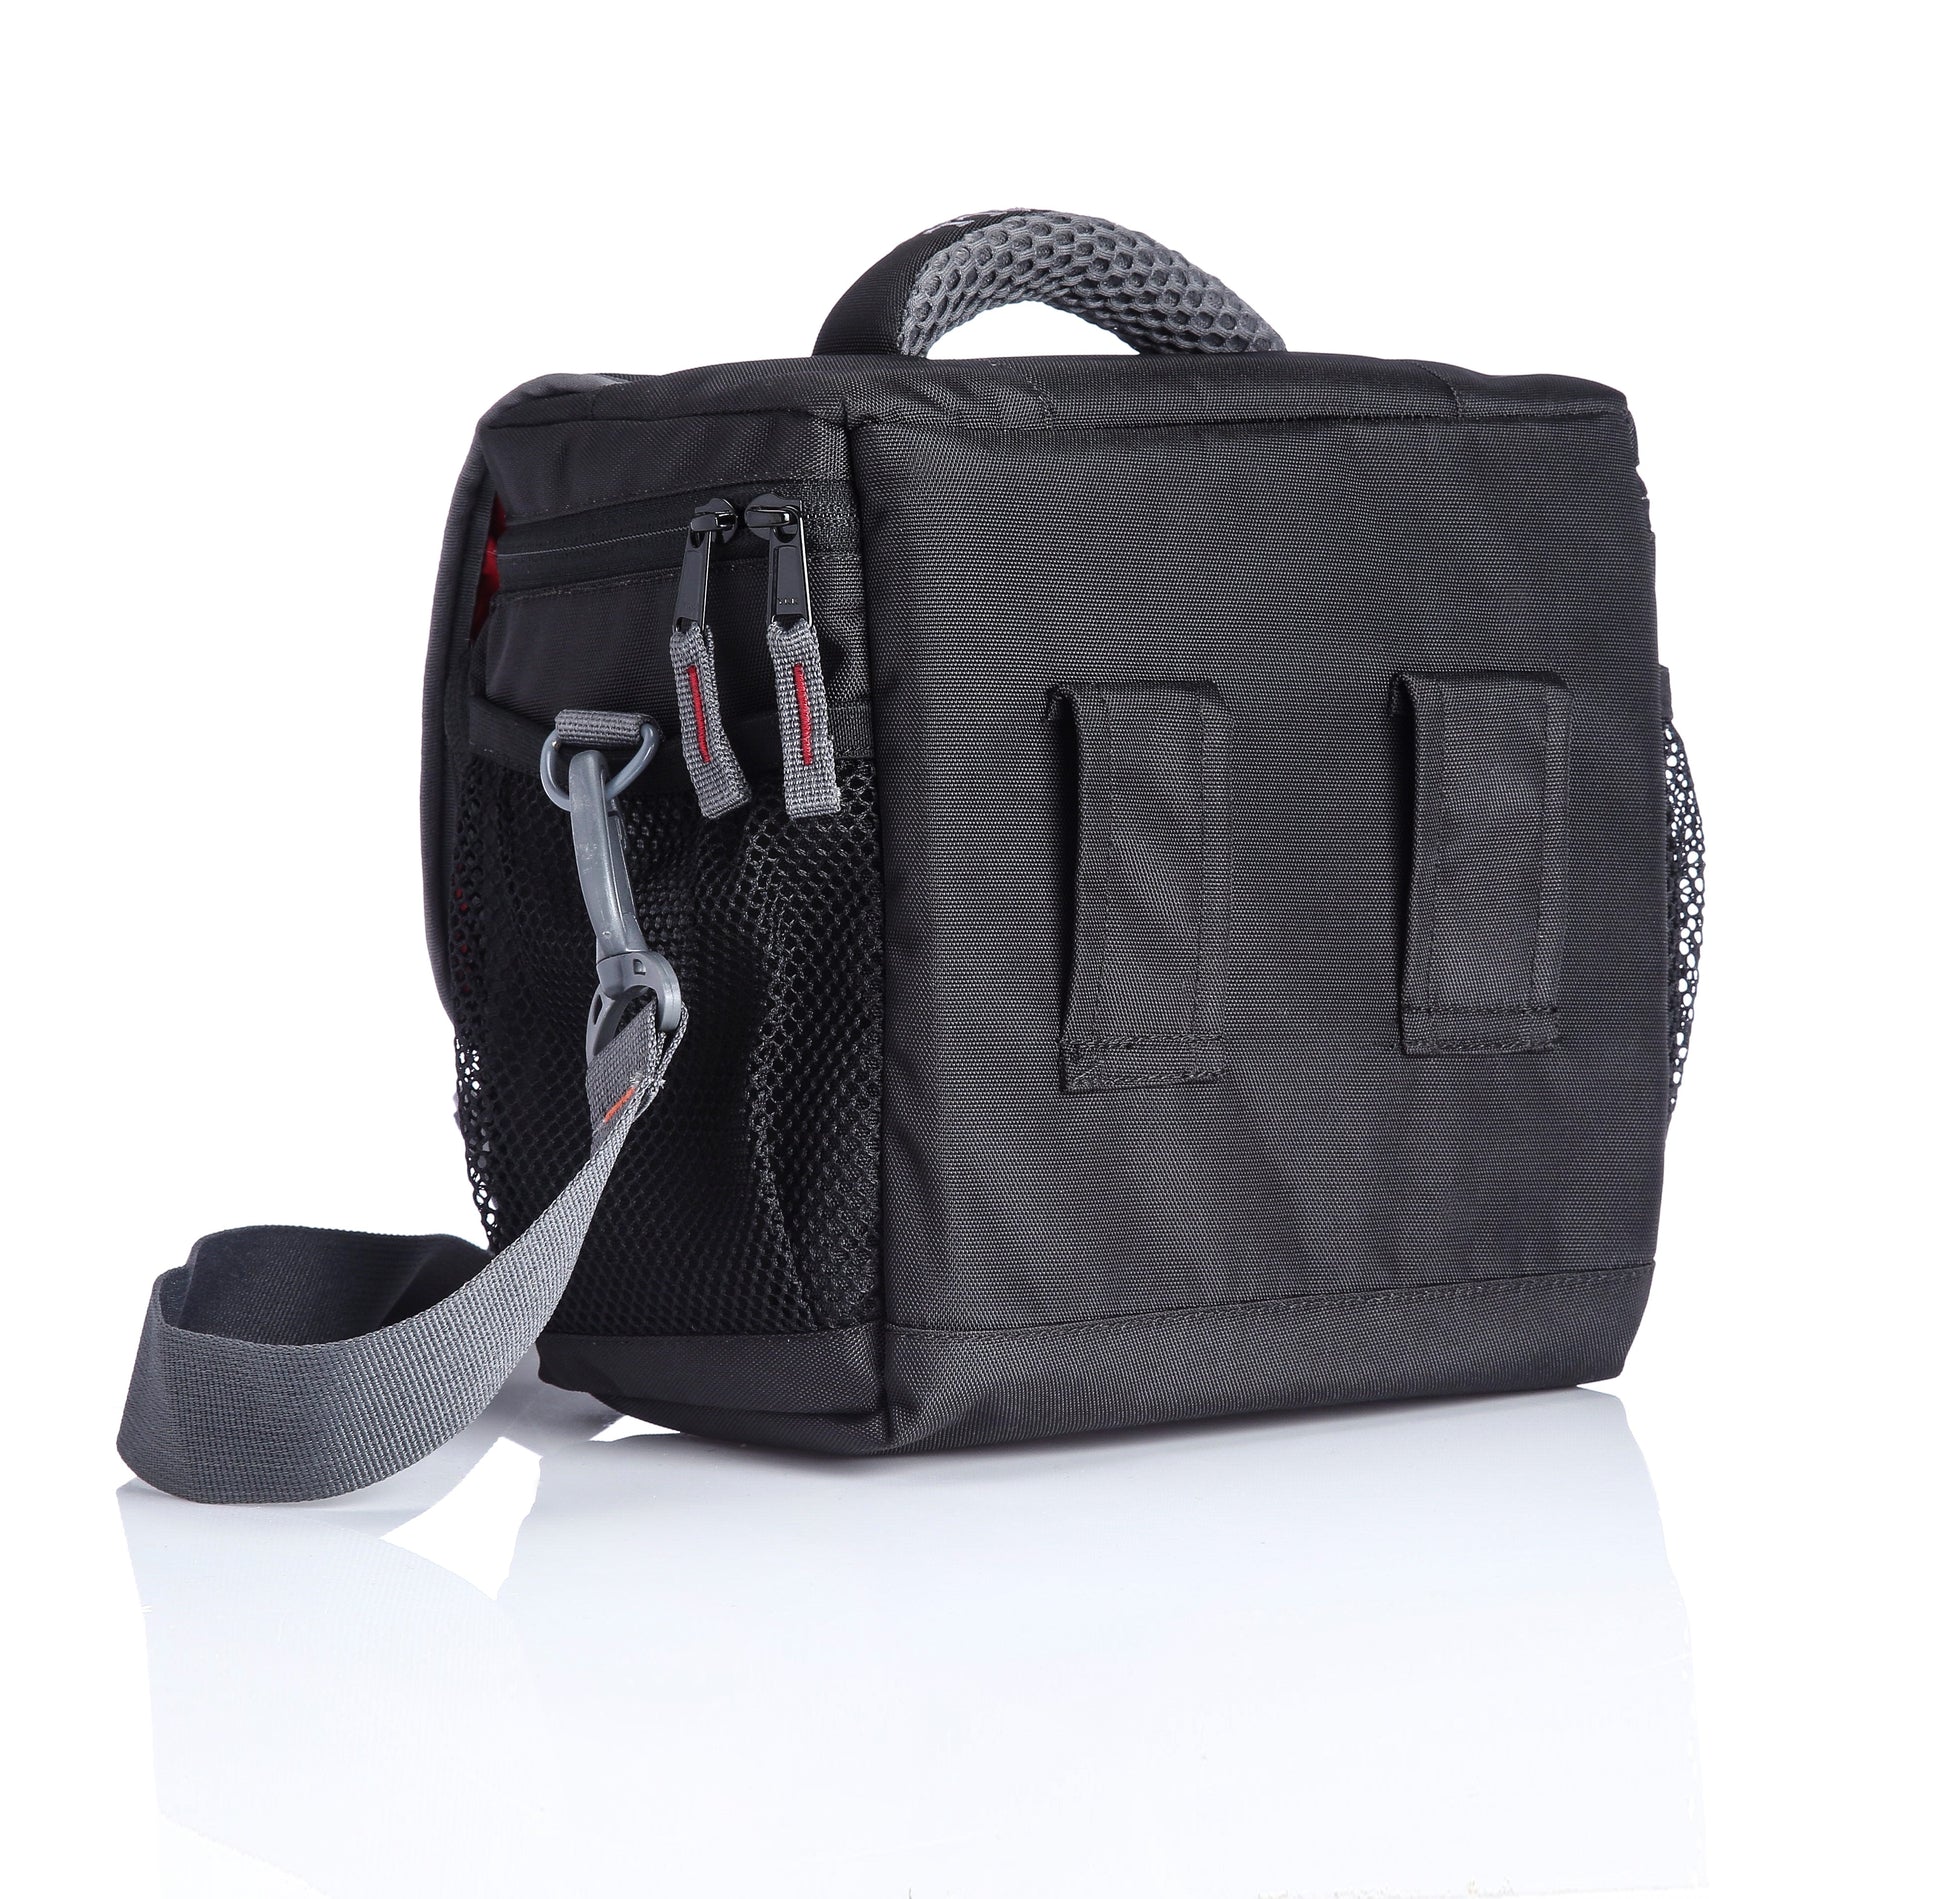 Image: Back view of the P28 PNX DSLR camera bag, highlighting its ergonomic design and adjustable sling strap. The bag's padded back panel and breathable materials offer comfortable carrying, while the adjustable strap allows for a customized fit. The compact and lightweight design makes it perfect for photographers on the move.